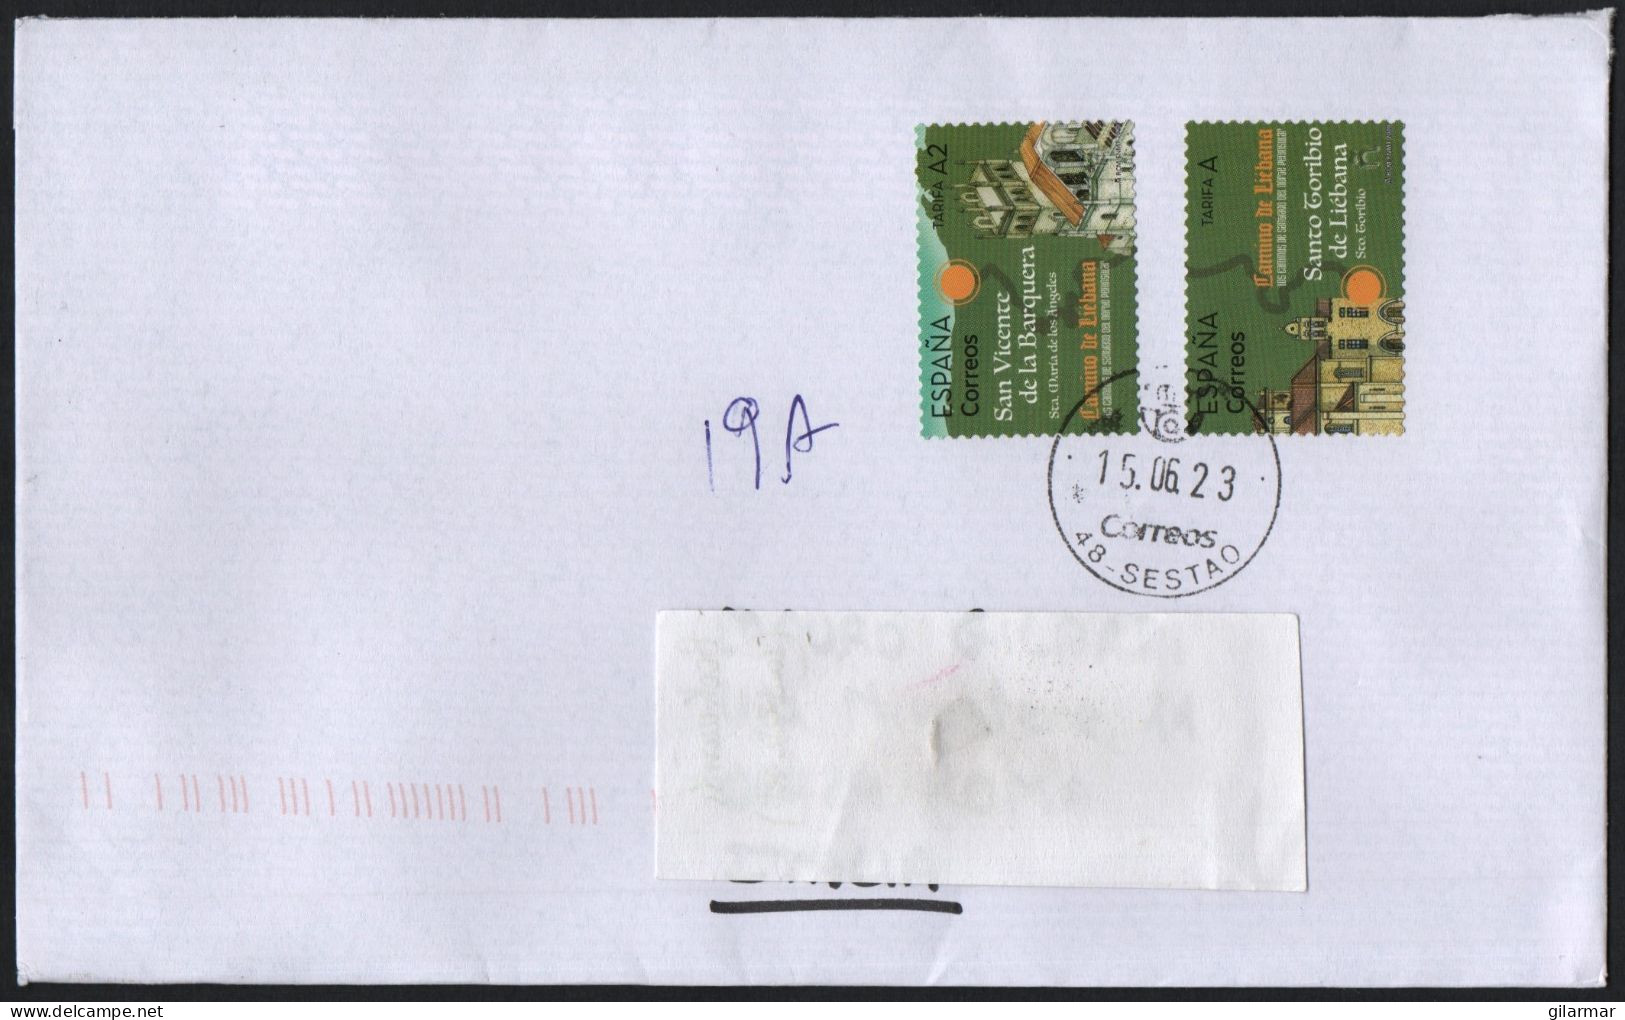 SPAIN 2023 - MAILED ENVELOPE - THE ROUTE OF ST. JAMES' WAY IN NORTHERN SPAIN - Lettres & Documents